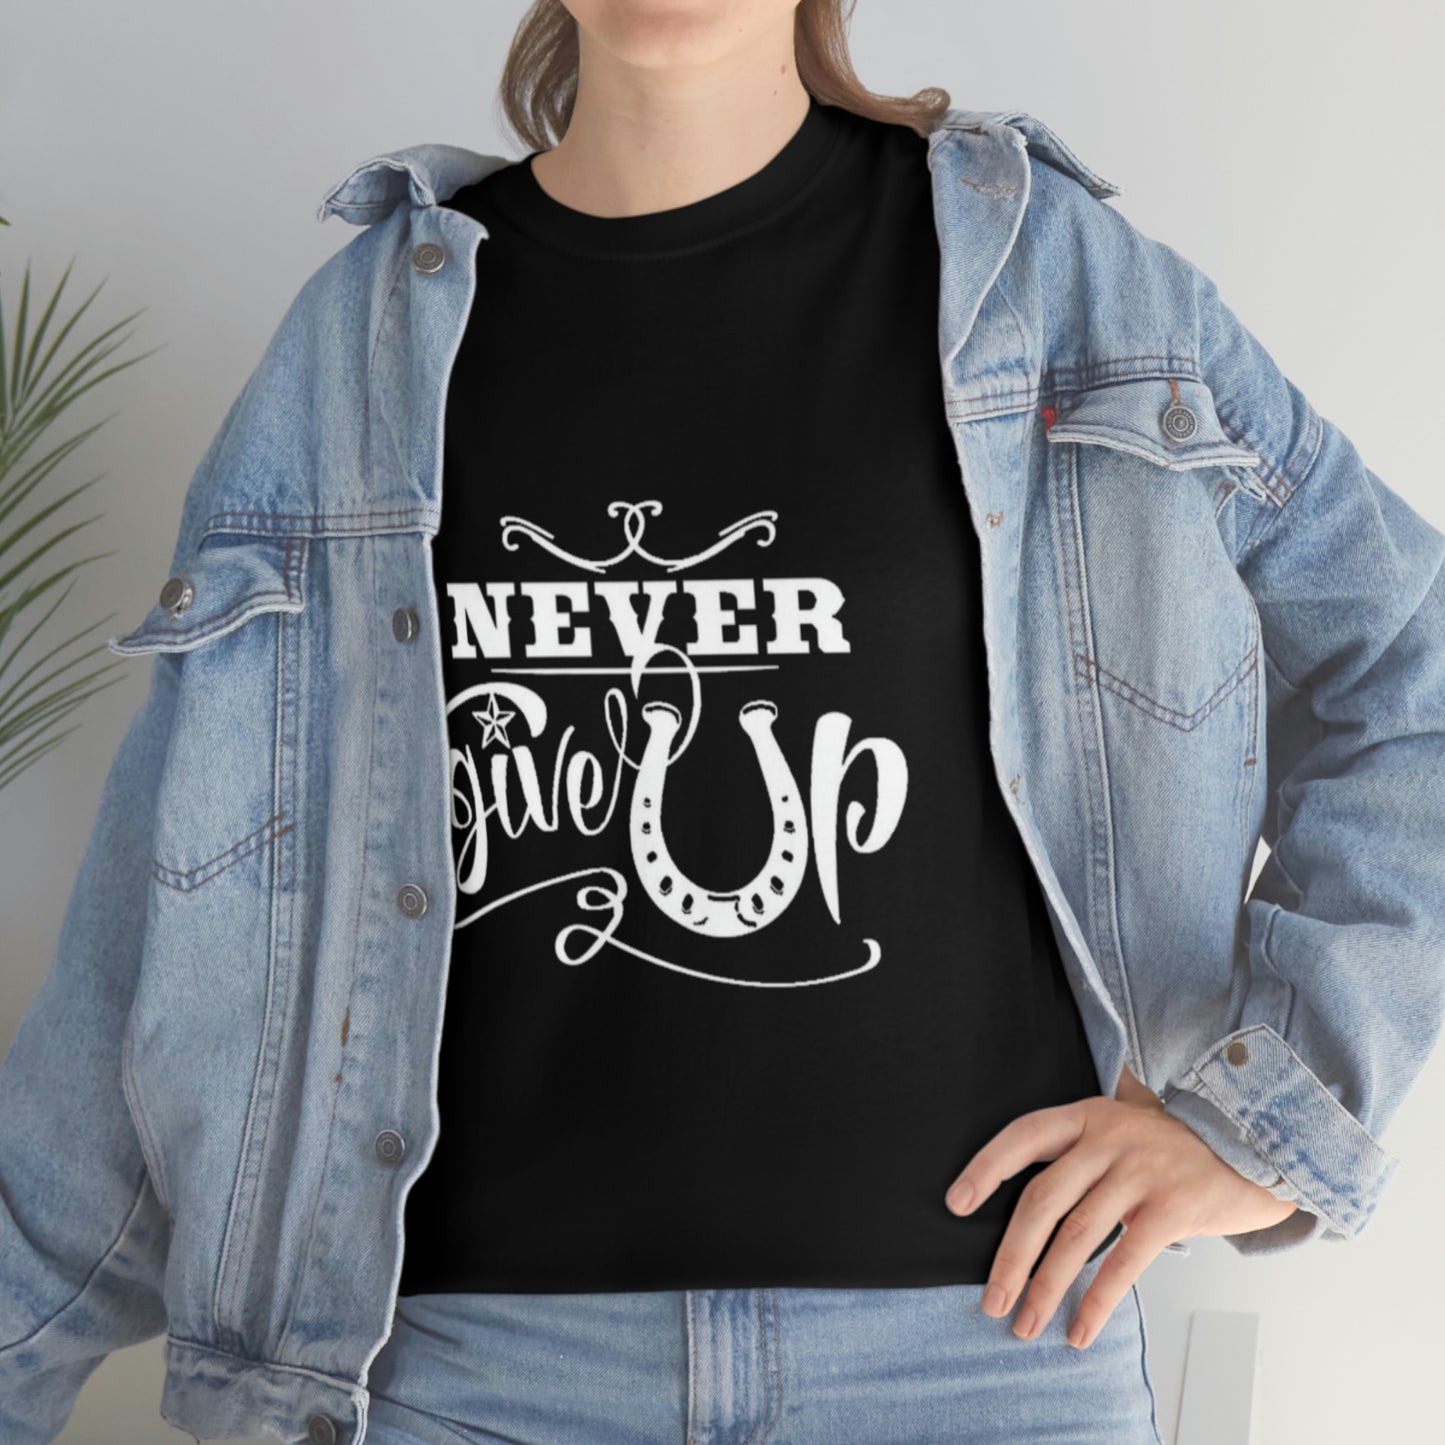 Never Give Up - Adult Tee (Front Logo)